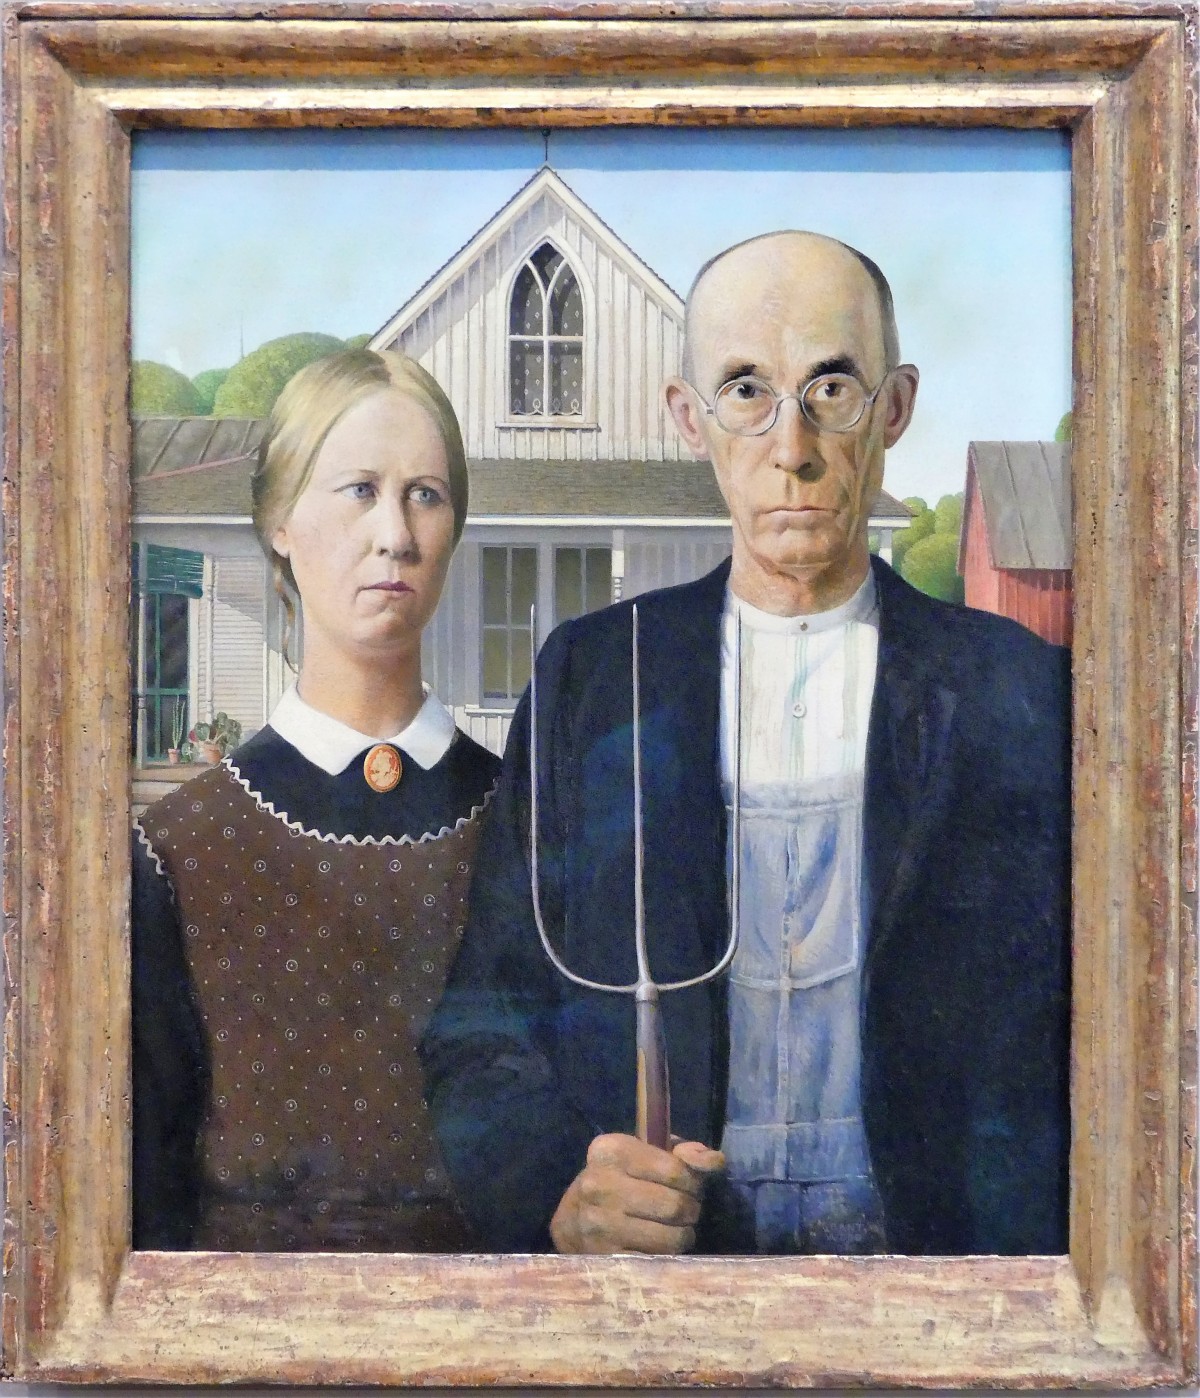 Grant Wood's American Gothic